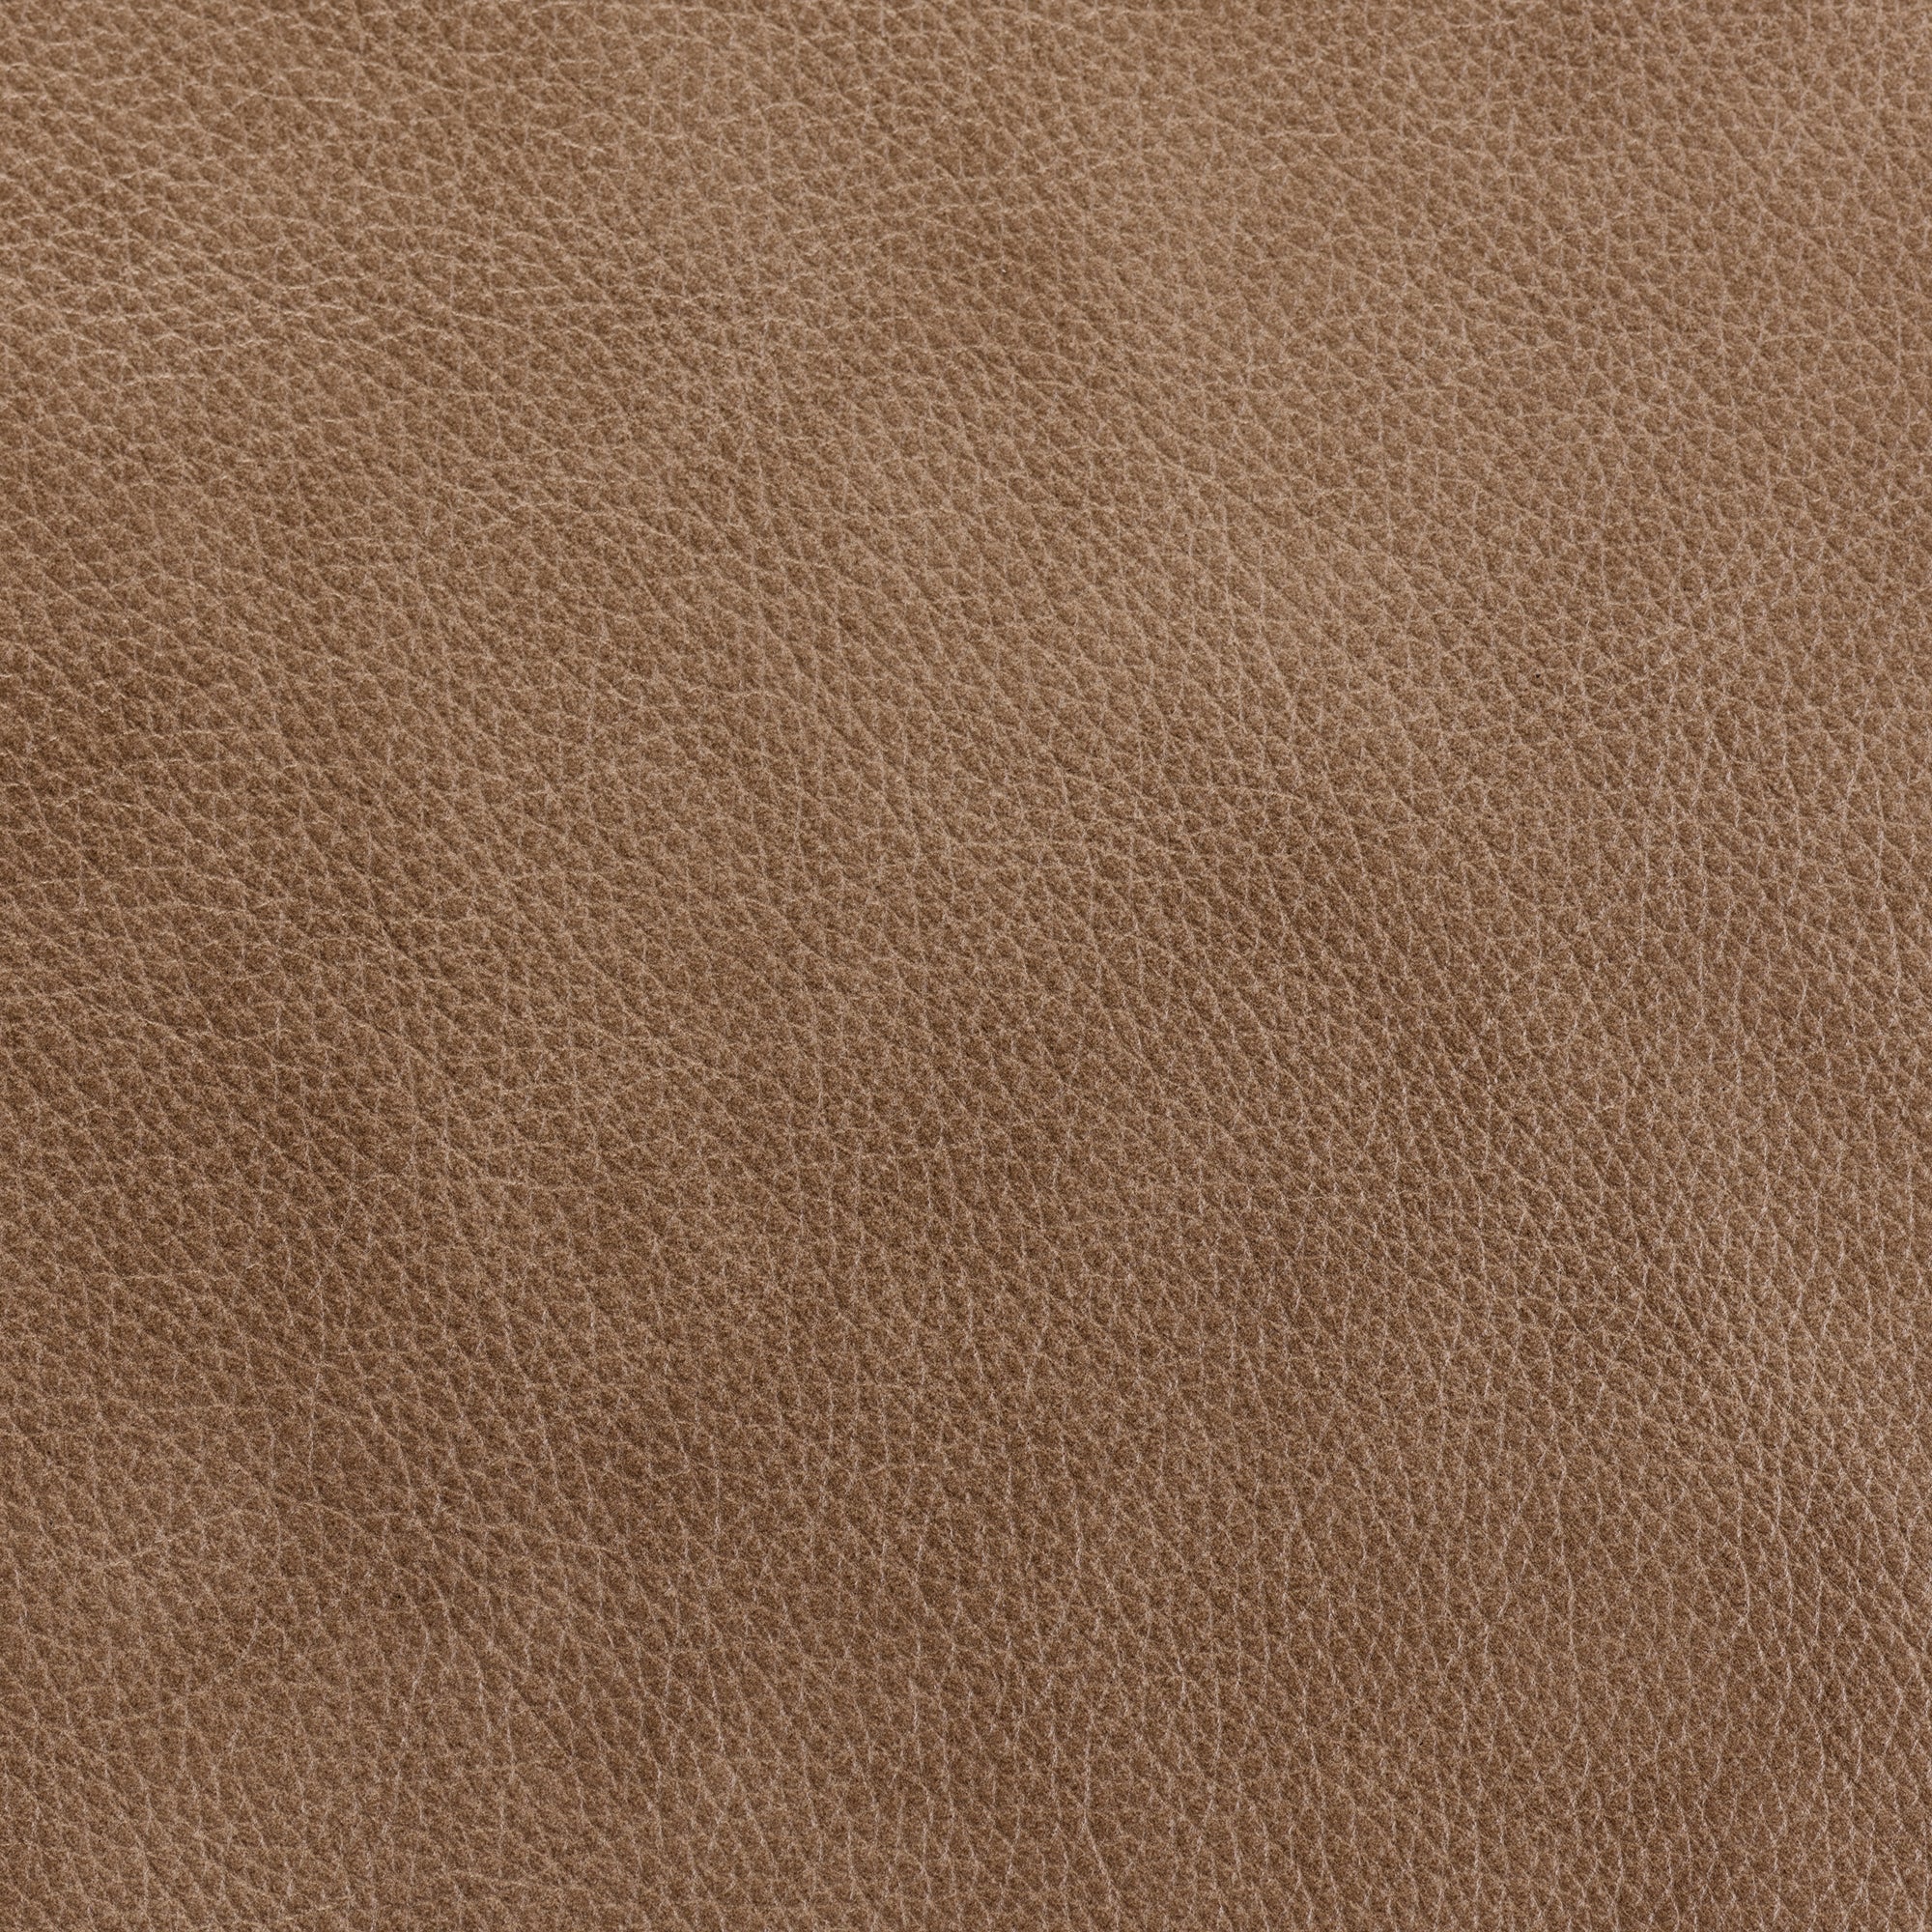 Pumice Vintage Leather - Swatch